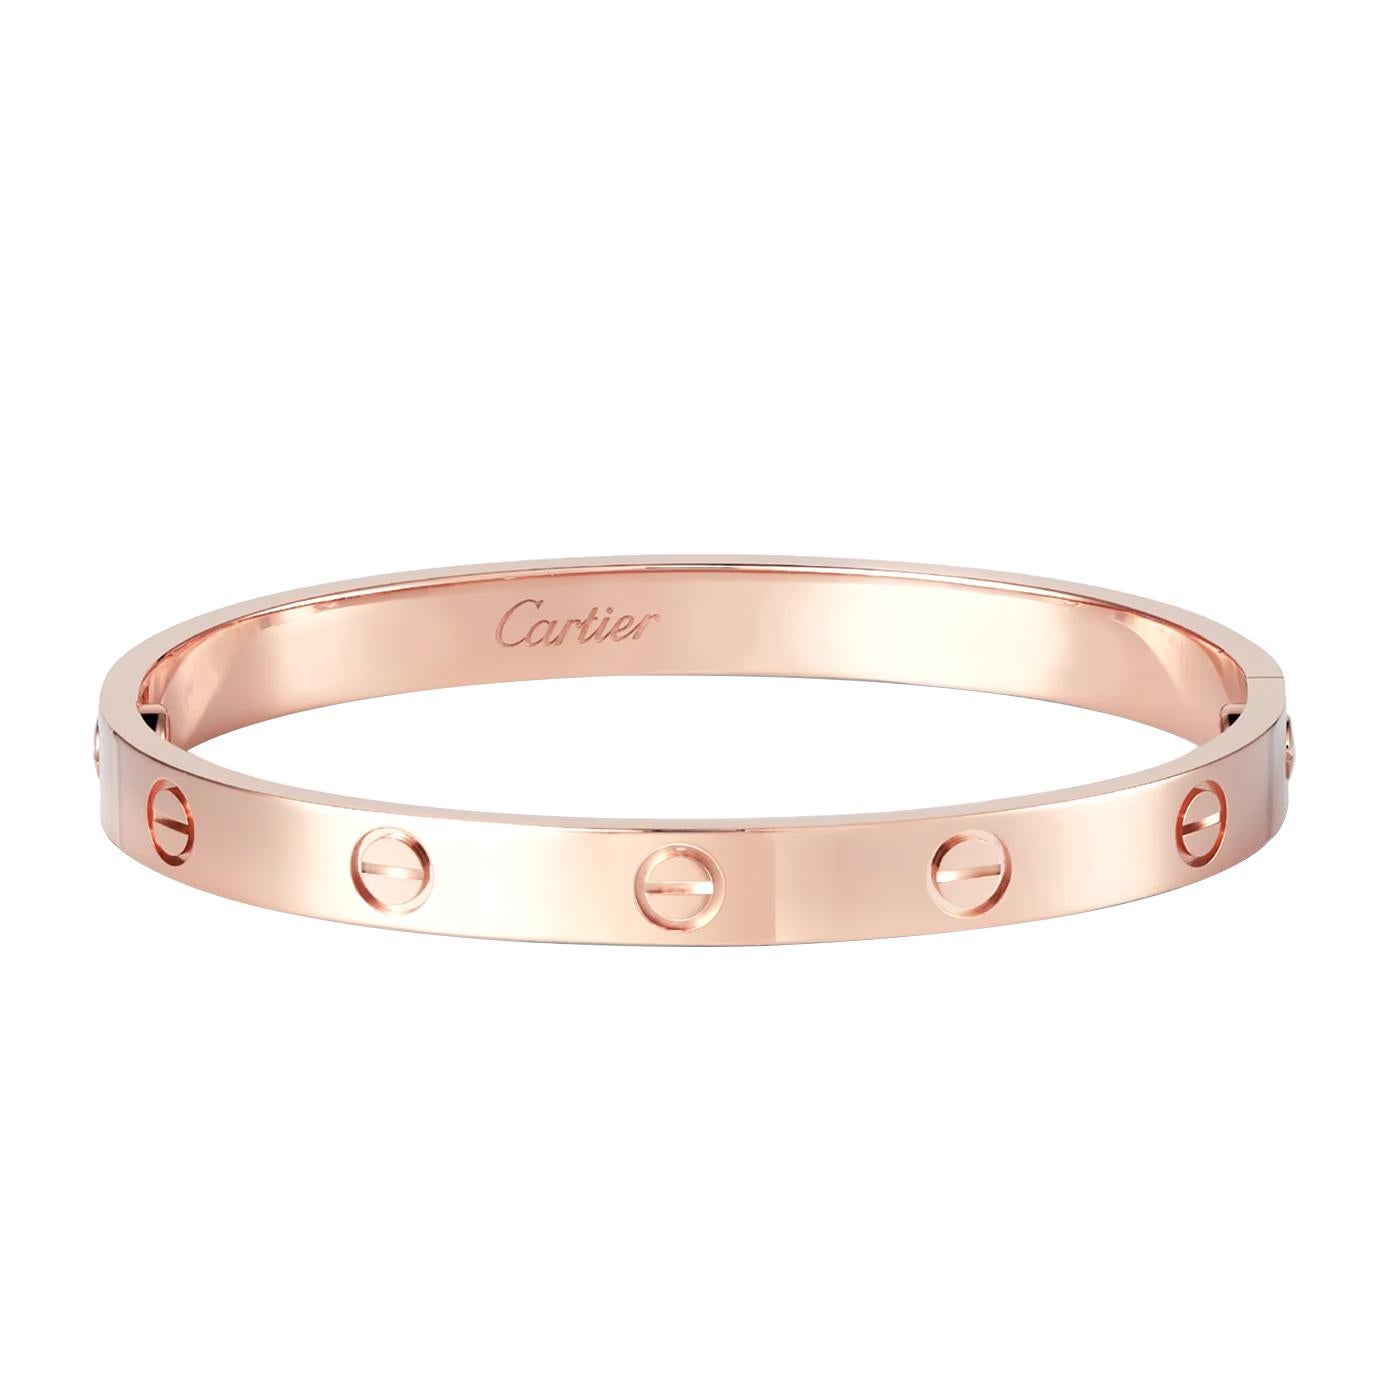 LOVE bracelet, 18K rose gold (750/1000). Comes with a screwdriver. Width: 6.1 mm. Created in New York in 1969, the LOVE bracelet is an icon of jewelry design: a close-fitting, oval bracelet composed of two rigid arcs which are worn on the wrist and